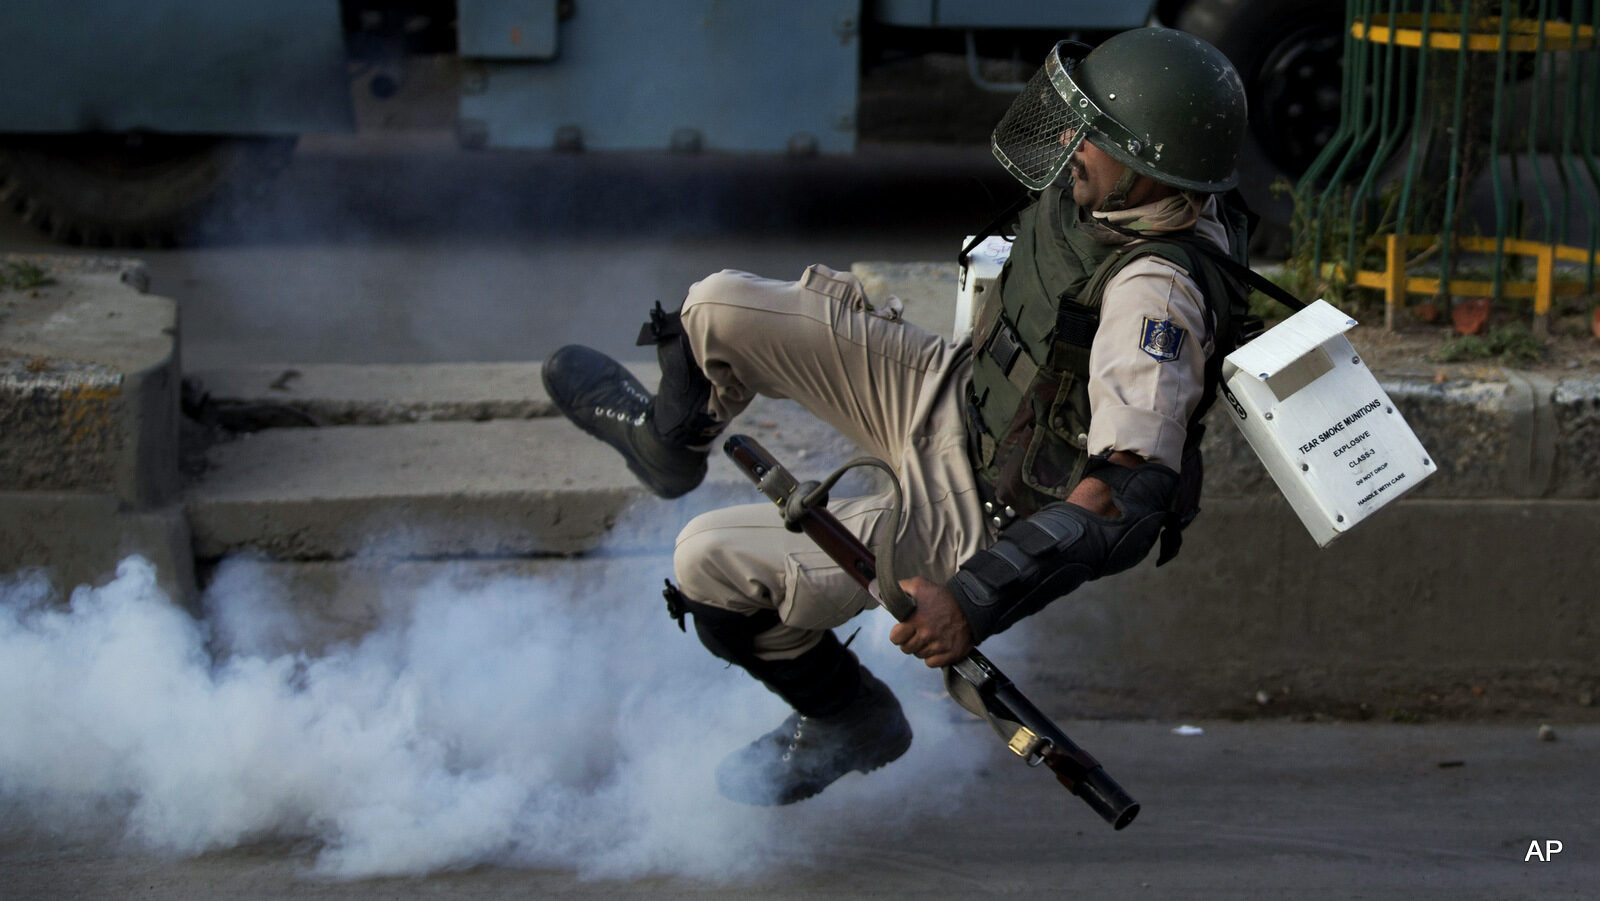 An Indian paramilitary soldier falls down as he tries to kick back an exploded tear gas shell thrown back at them by Kashmiri protesters at the end of a day long curfew in Srinagar, Indian occupied Kashmir, Monday, Aug. 8, 2016.